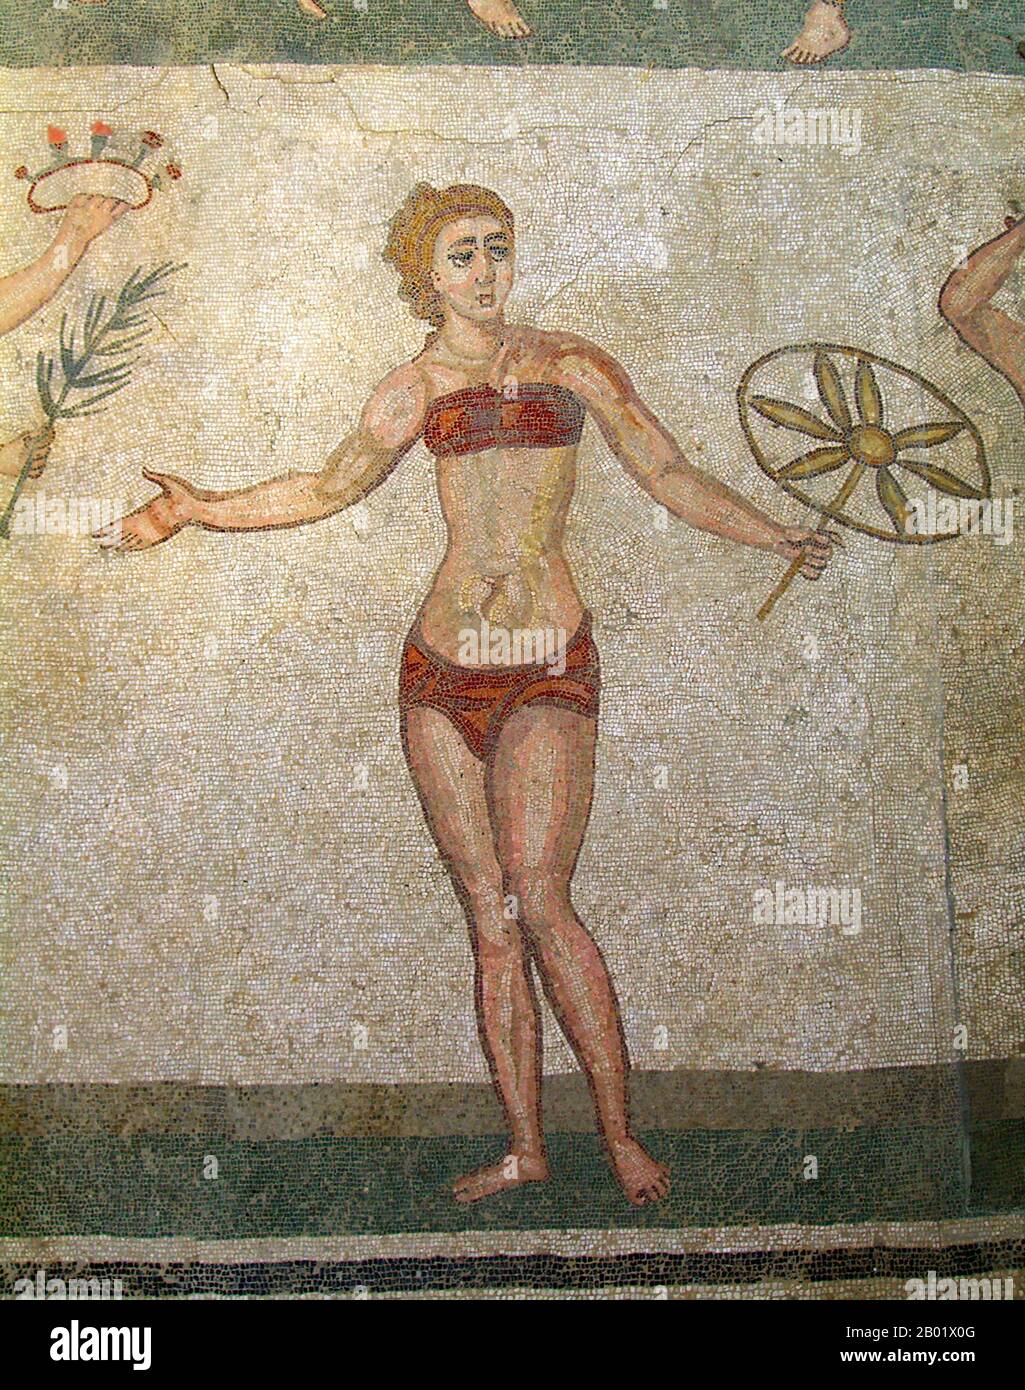 Italy: Roman women playing with a ball in a mosaic at Villa Romana del Casale. One of the so-called 'Bikini Mosaics', 4th century CE. Photo by Pavel Krok (CC BY-SA 3.0 License).  Villa Romana del Casale (Sicilian: Villa Rumana dû Casali) is a Roman villa built in the first quarter of the 4th century CE and located about 5 km outside the town of Piazza Armerina, Sicily, southern Italy. Containing the richest, largest and most complex collection of Roman mosaics in the world, it is one of 44 UNESCO World Heritage Sites in Italy. Stock Photo